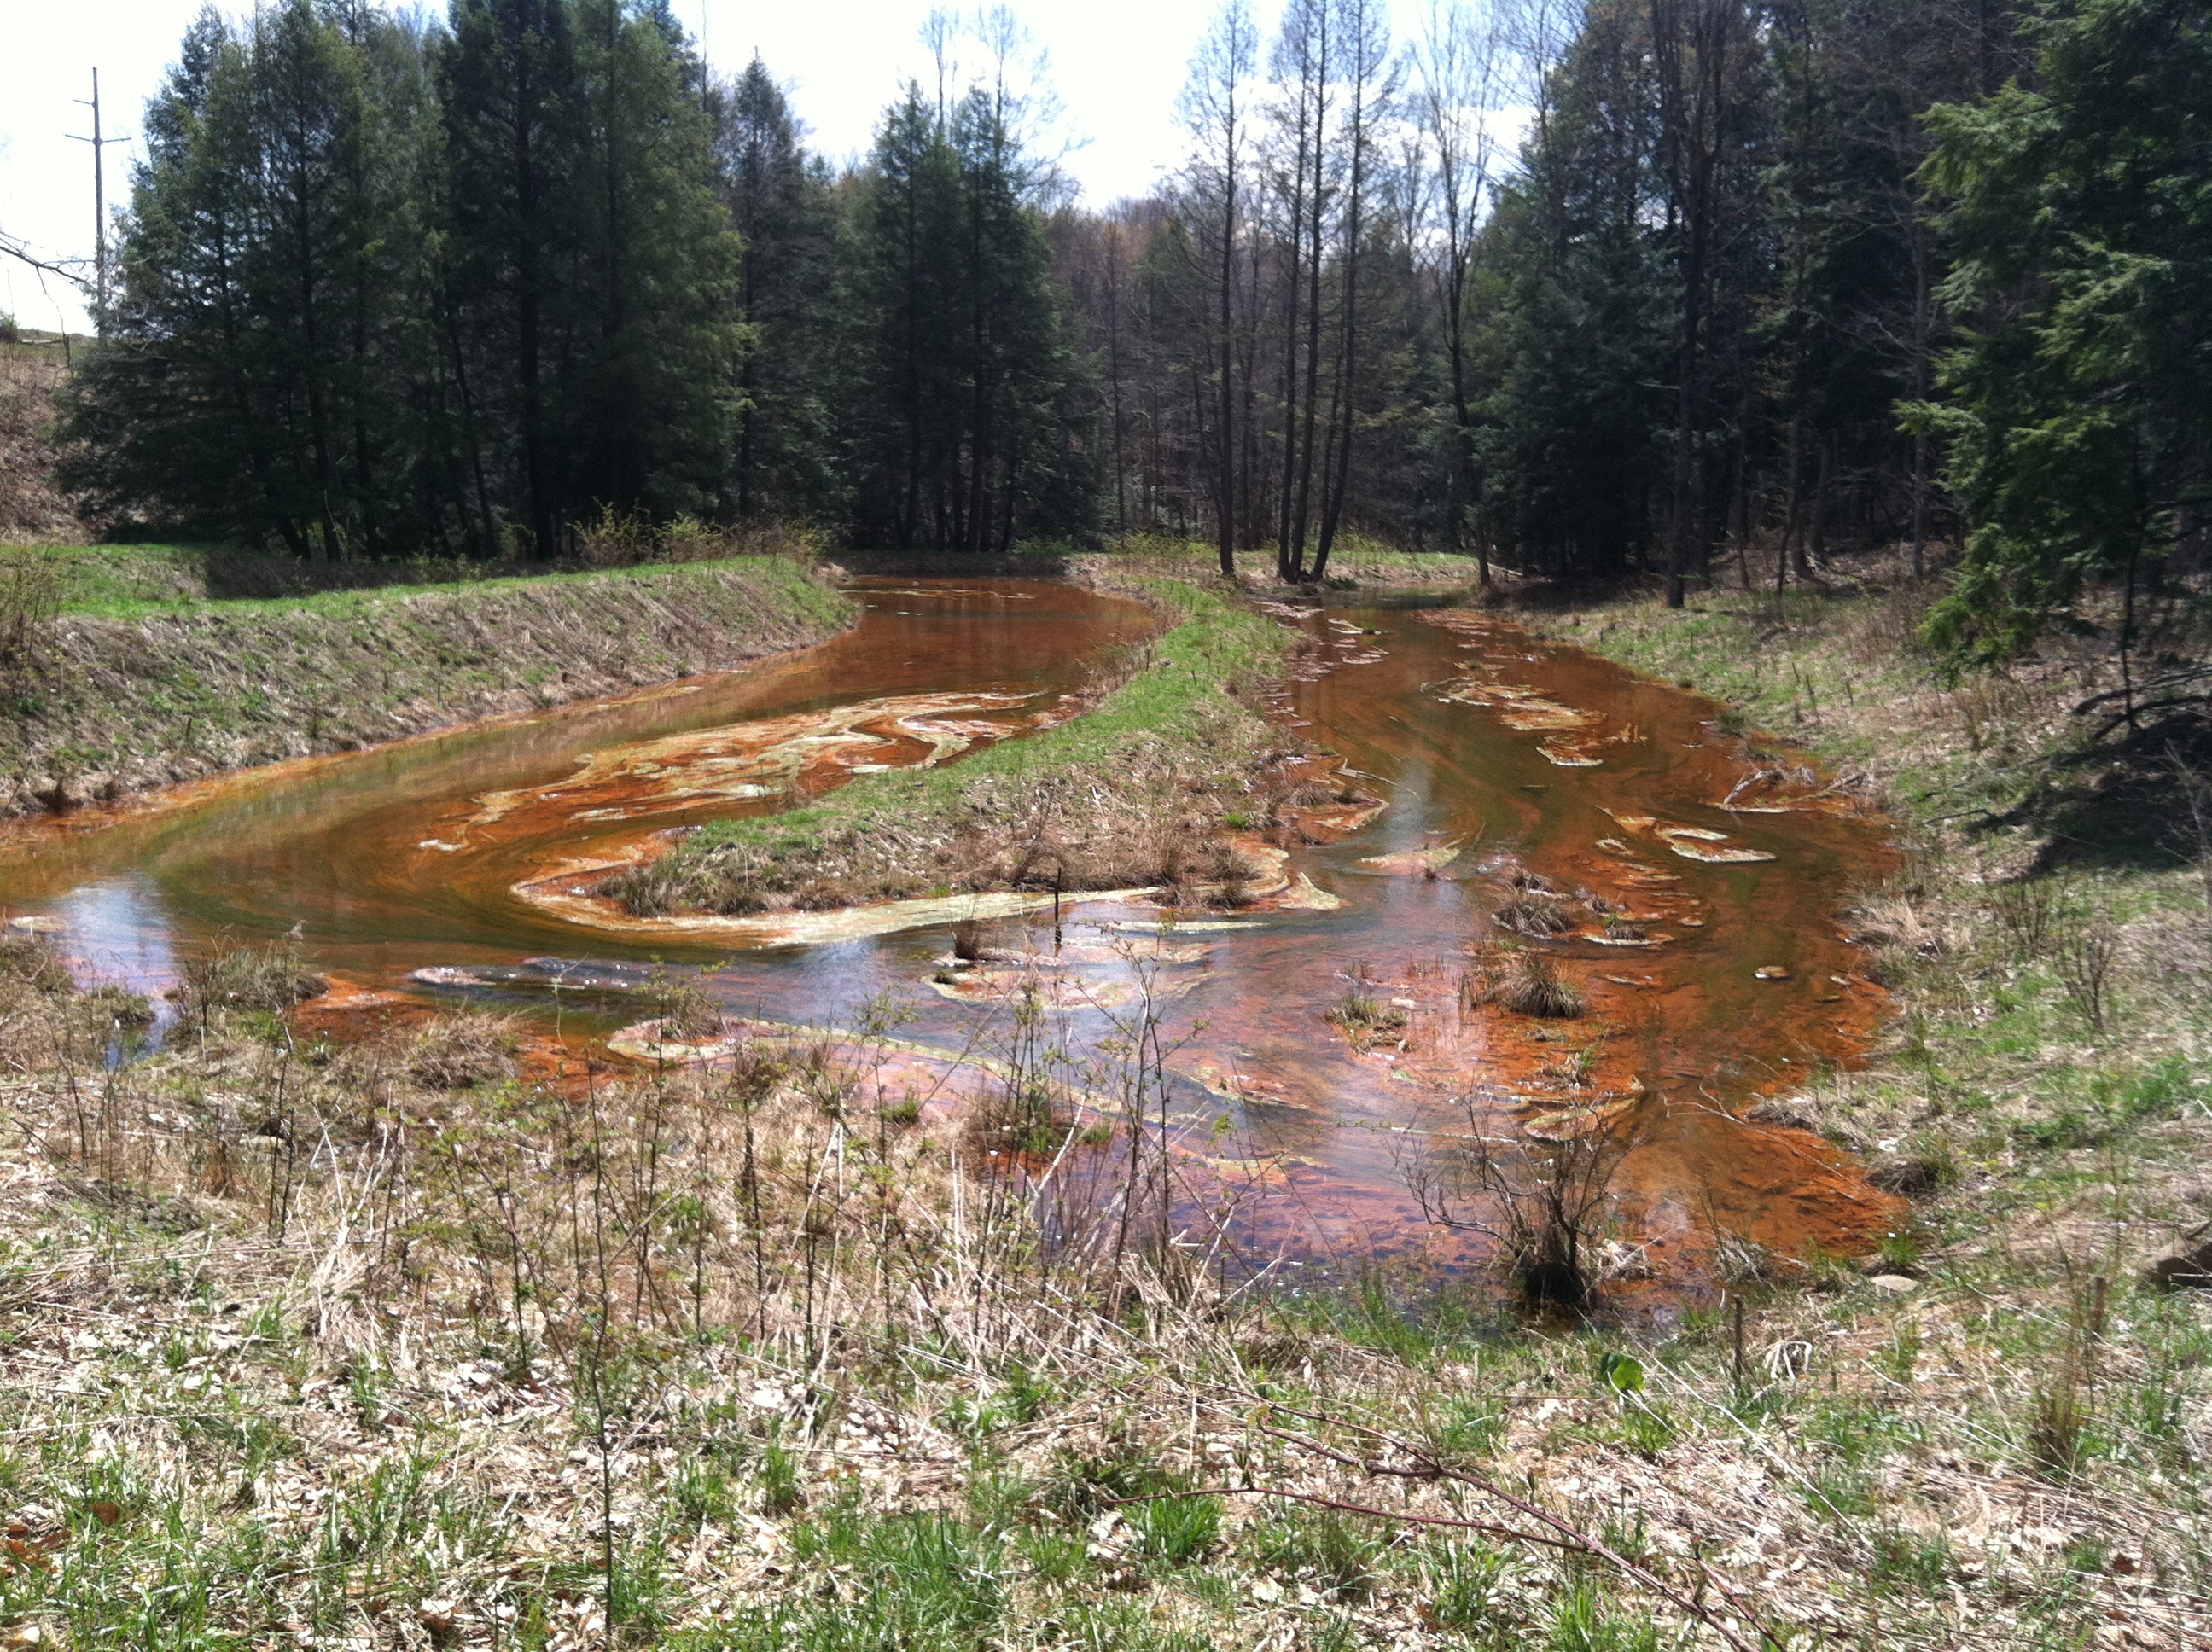 Overview of settling pond from northern bank facing south april 2013